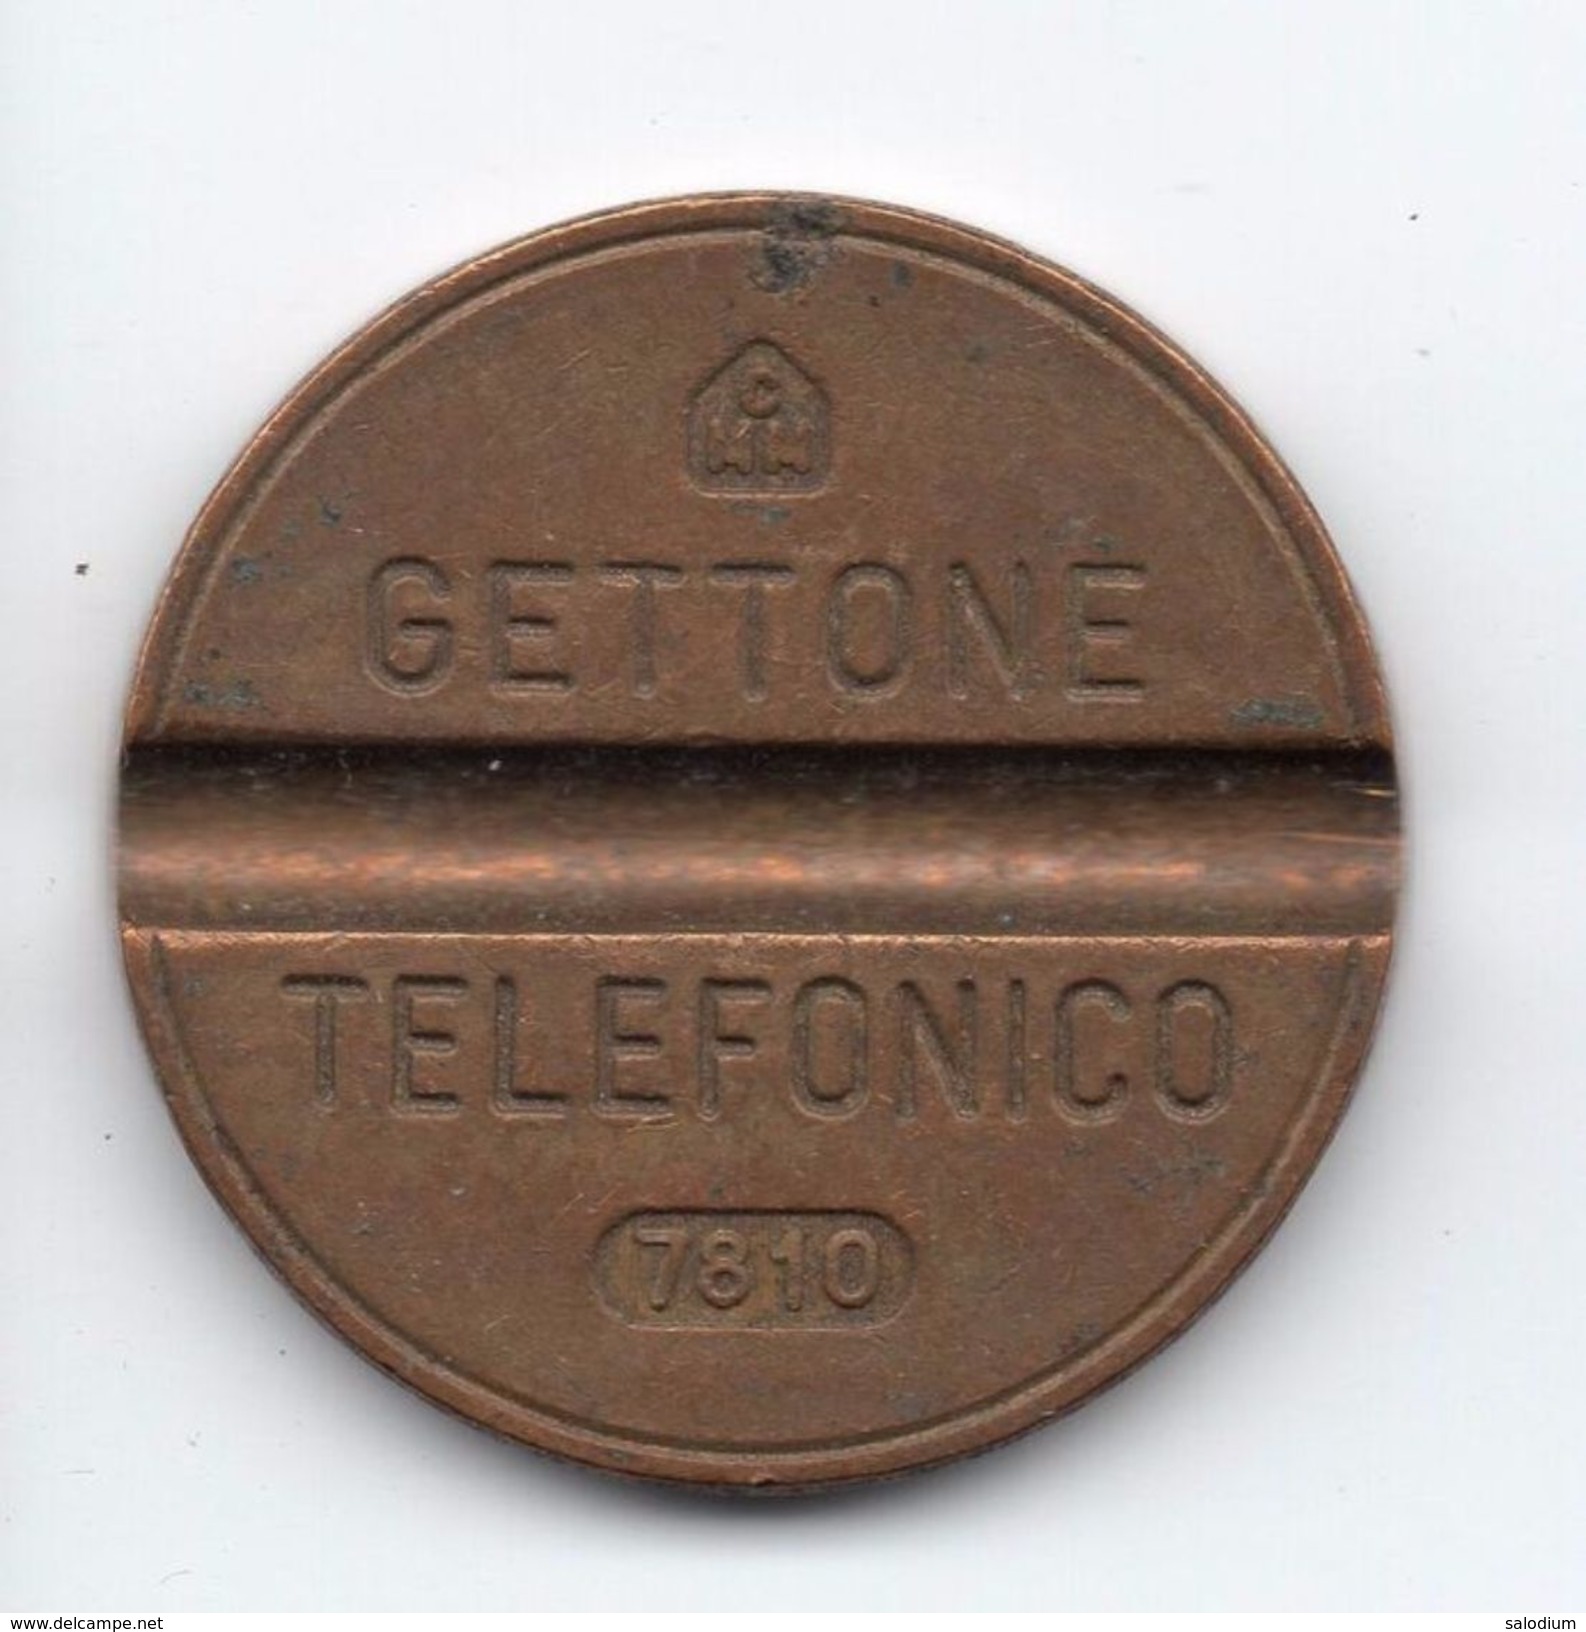 Gettone Telefonico 7810 Token Telephone - (Id-630) - Professionals/Firms